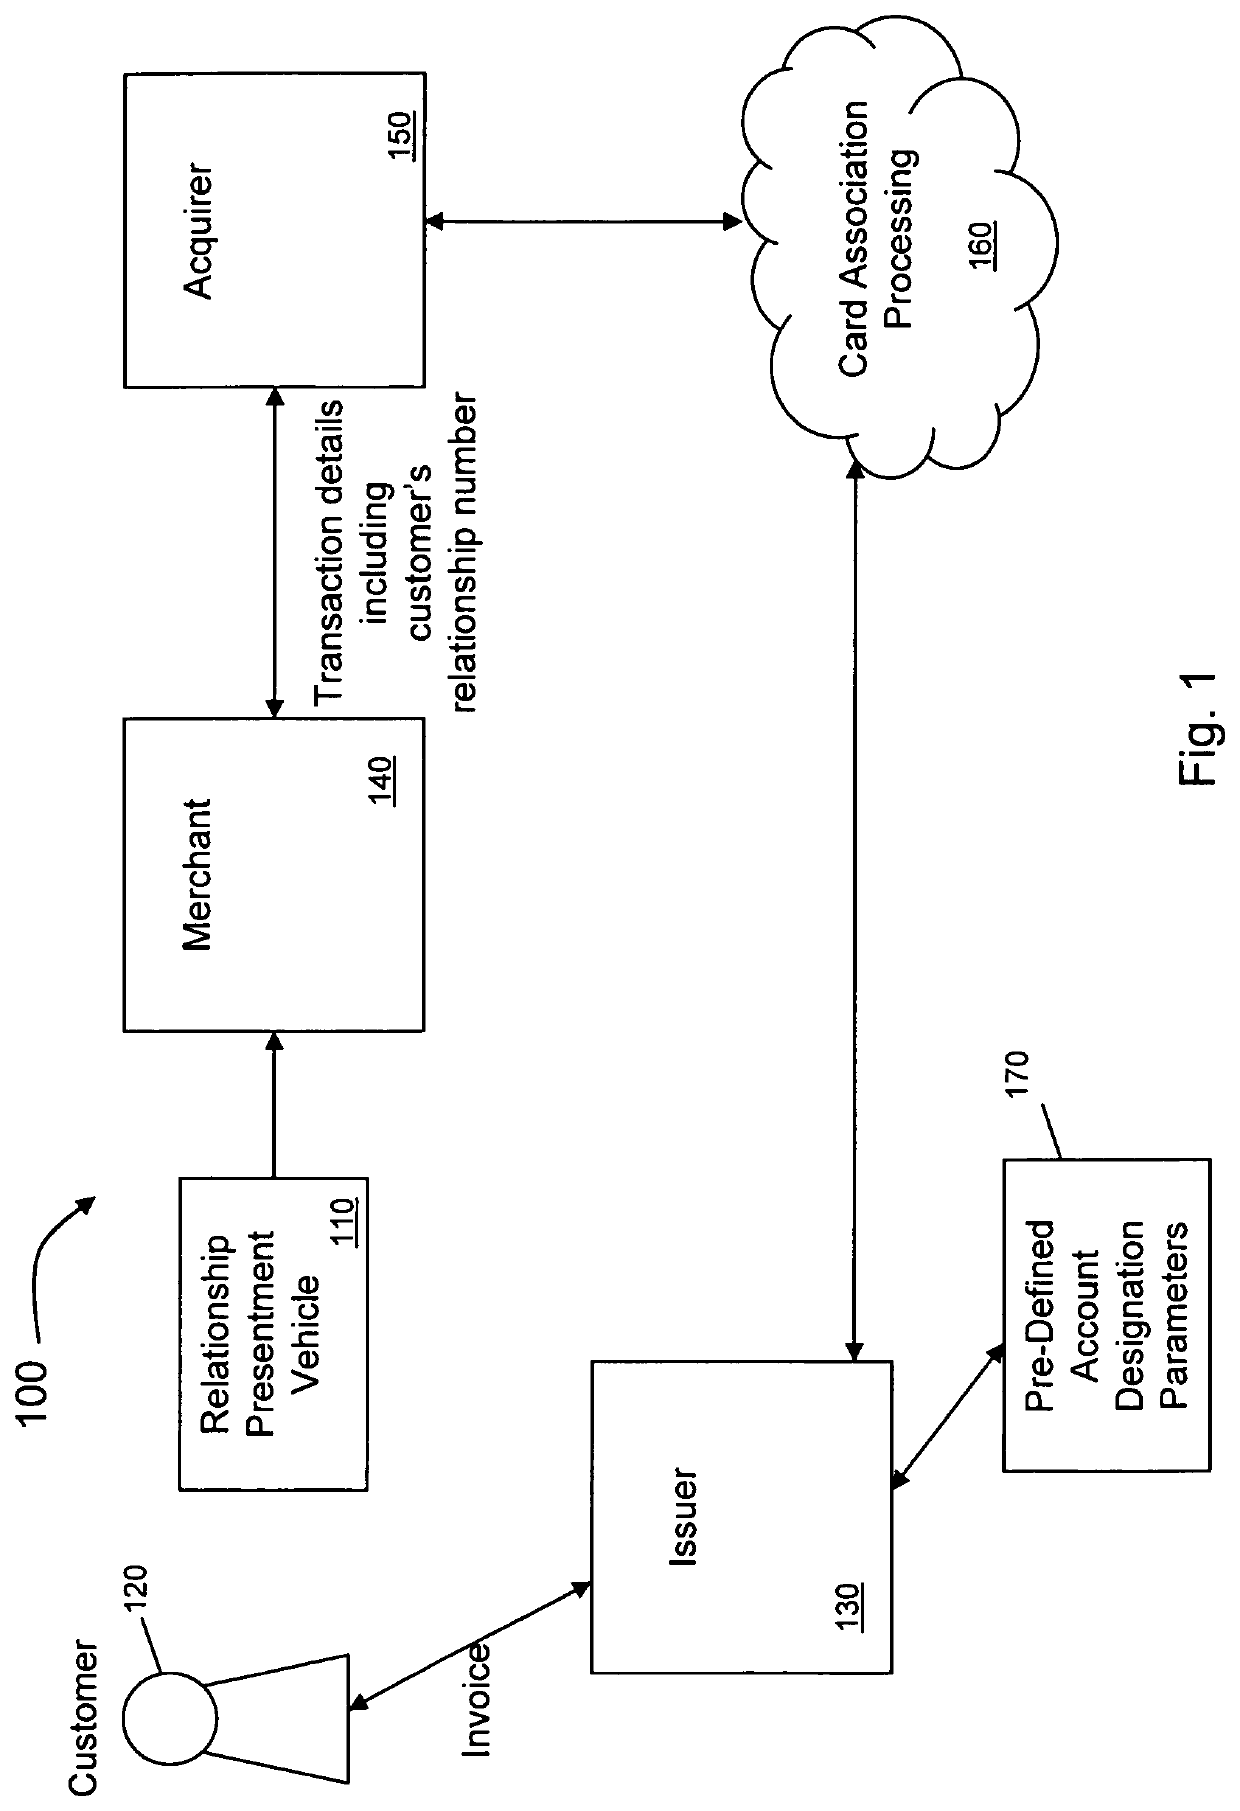 Methods and systems for managing financial institution customer accounts